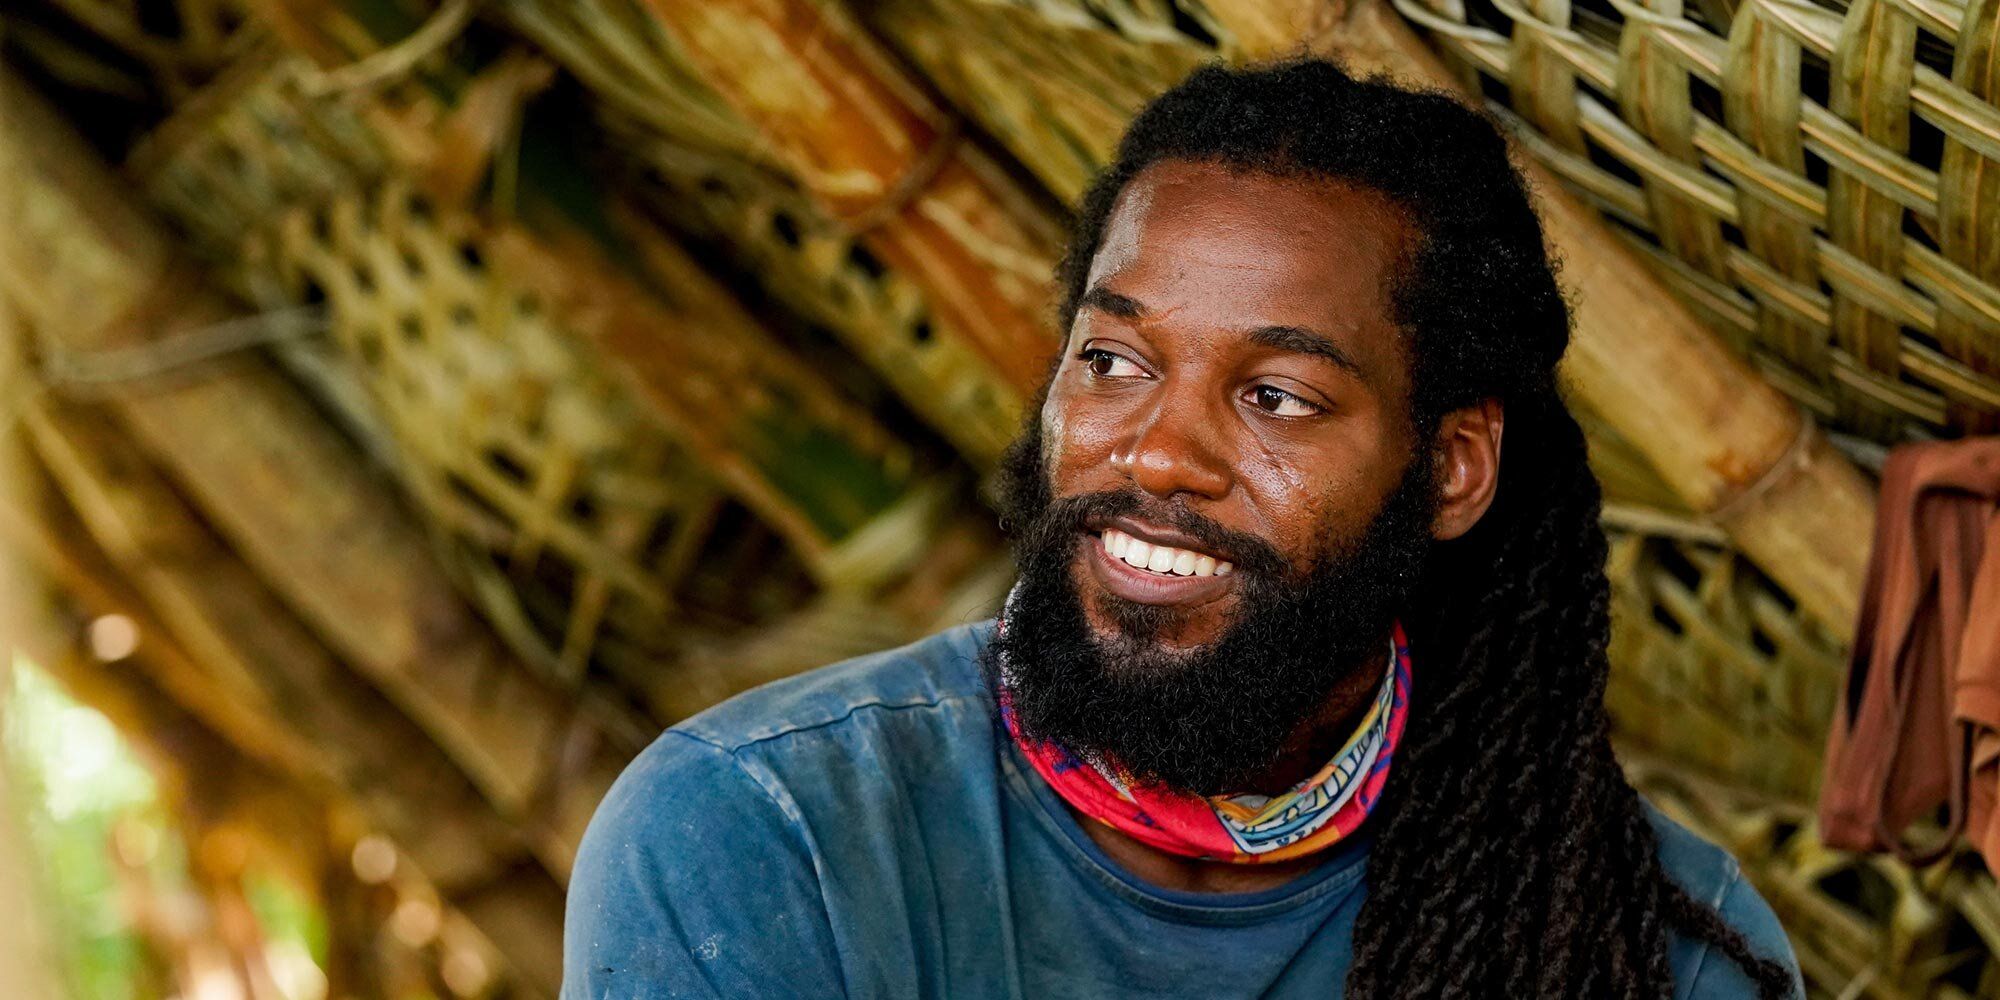 Danny McCray in Survivor 41 smiling with blue t-shirt and red buff on